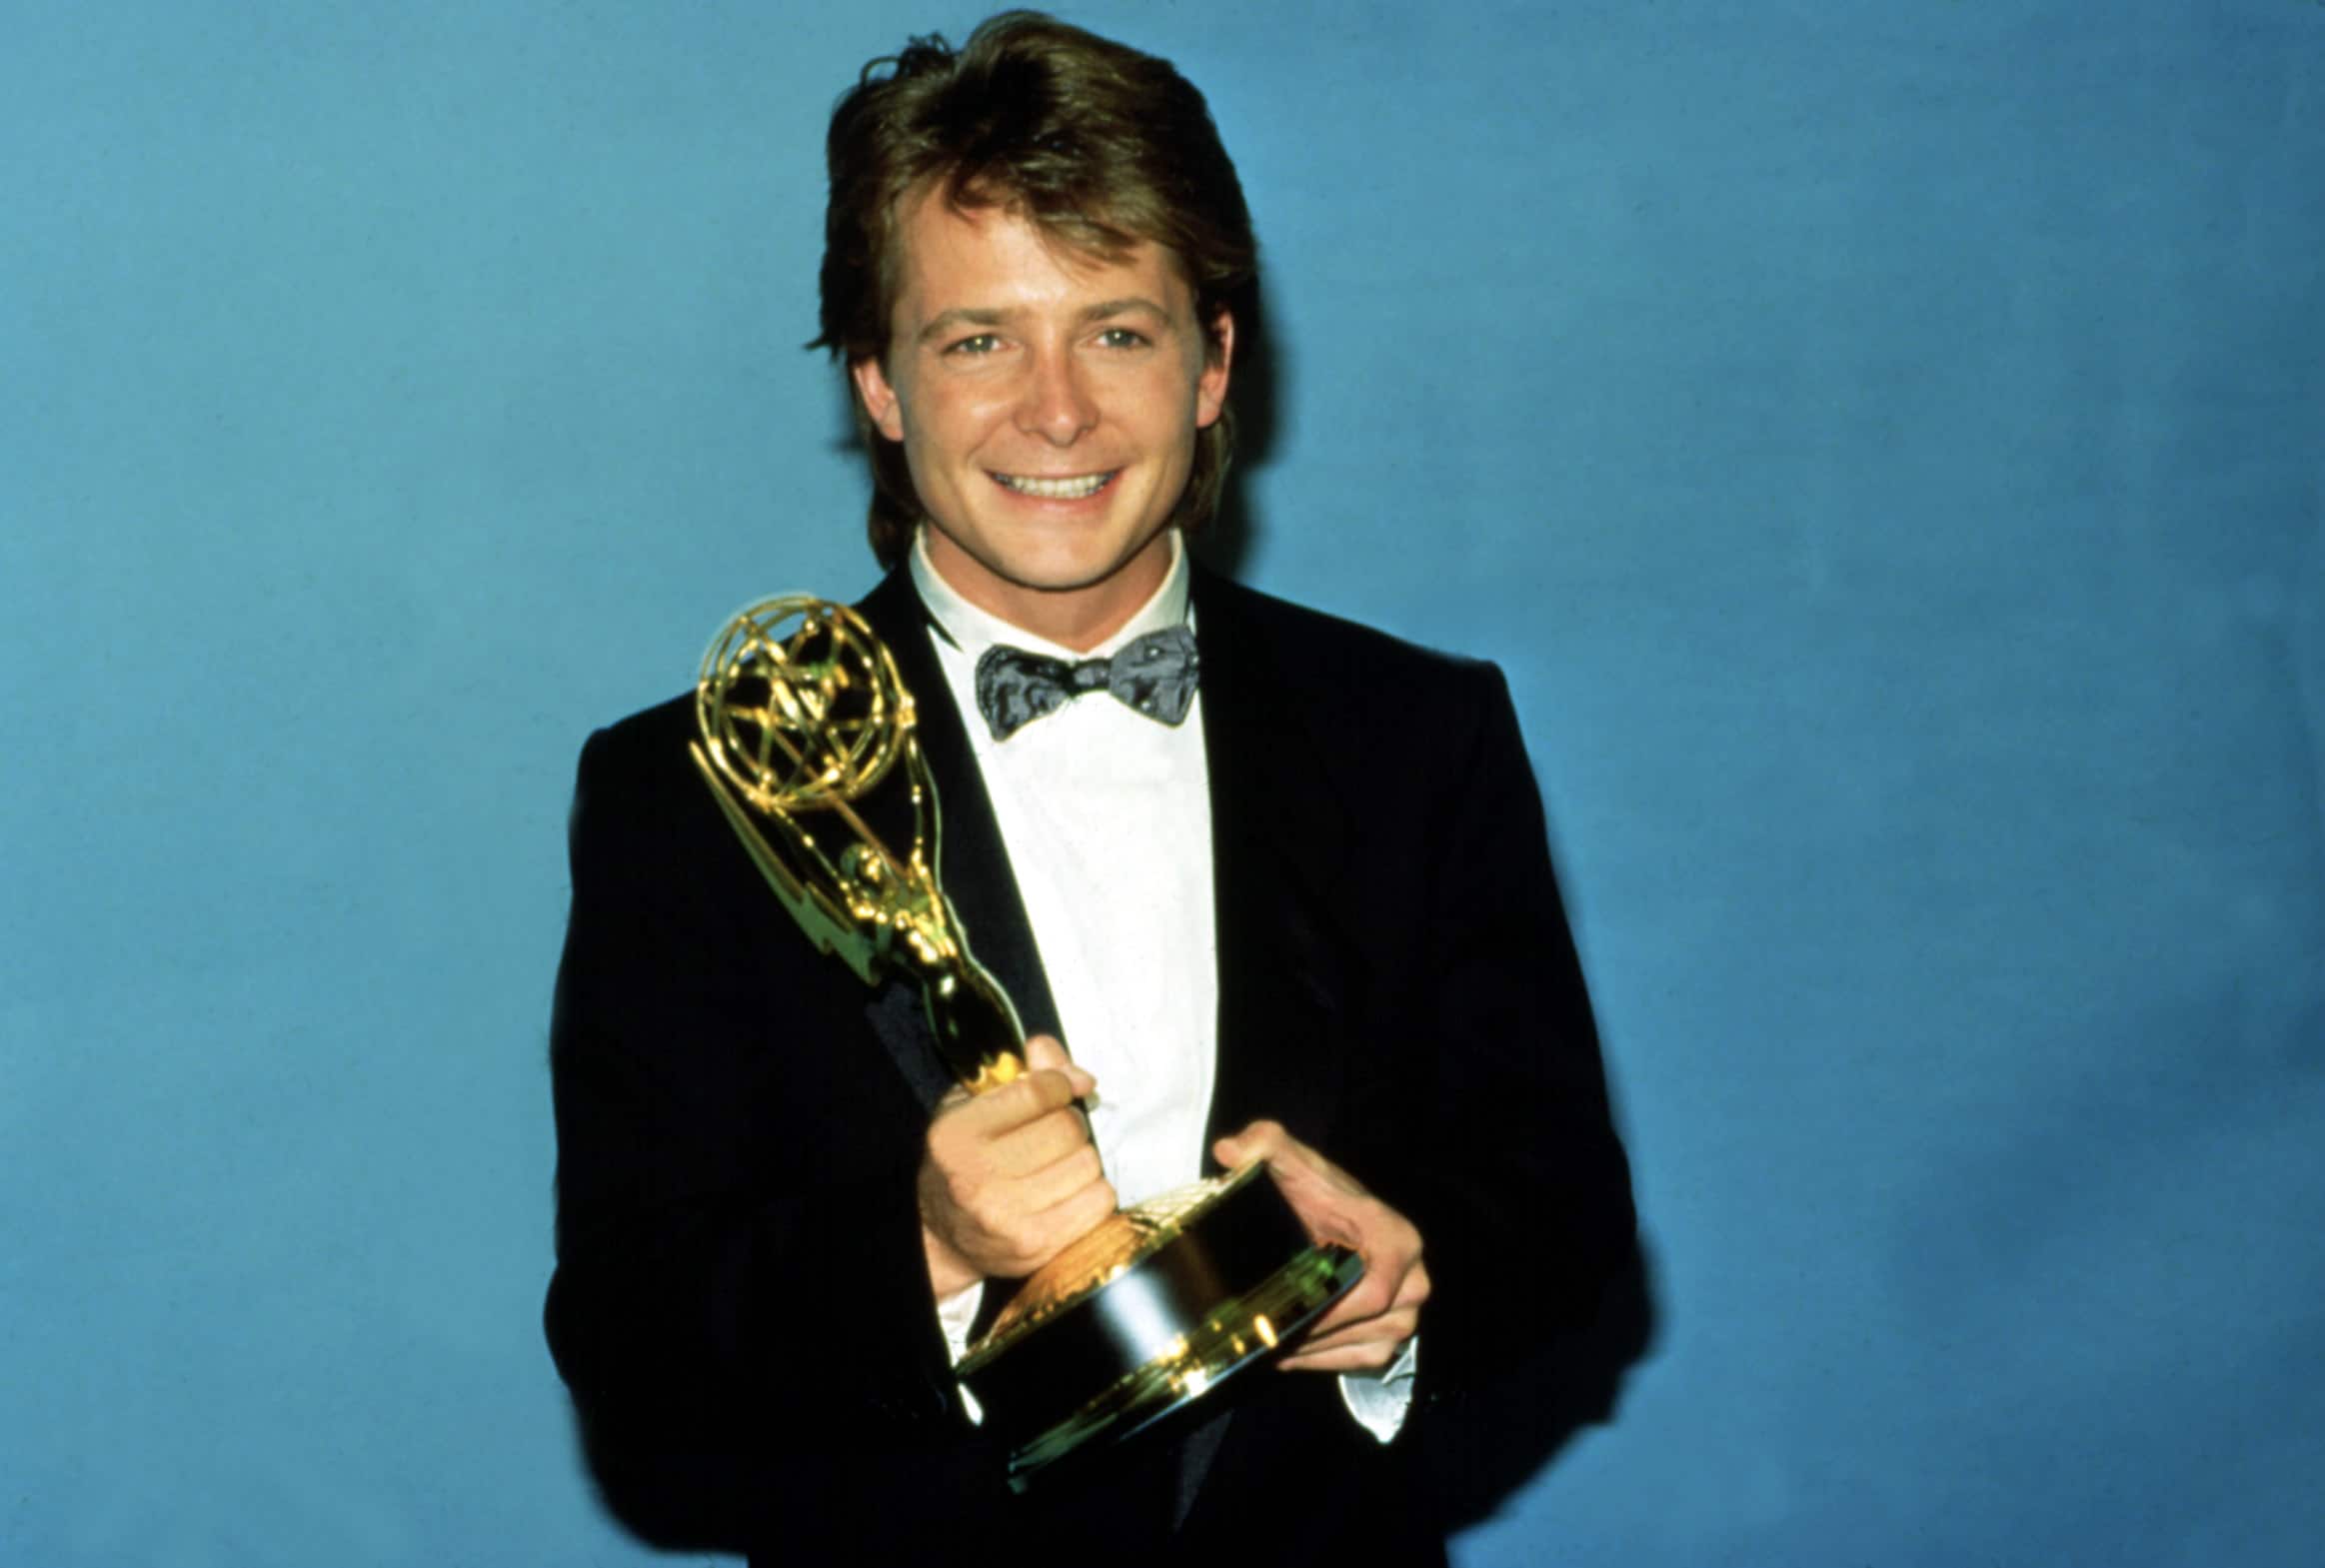 Michael J. Fox with his Emmy Award, 1987